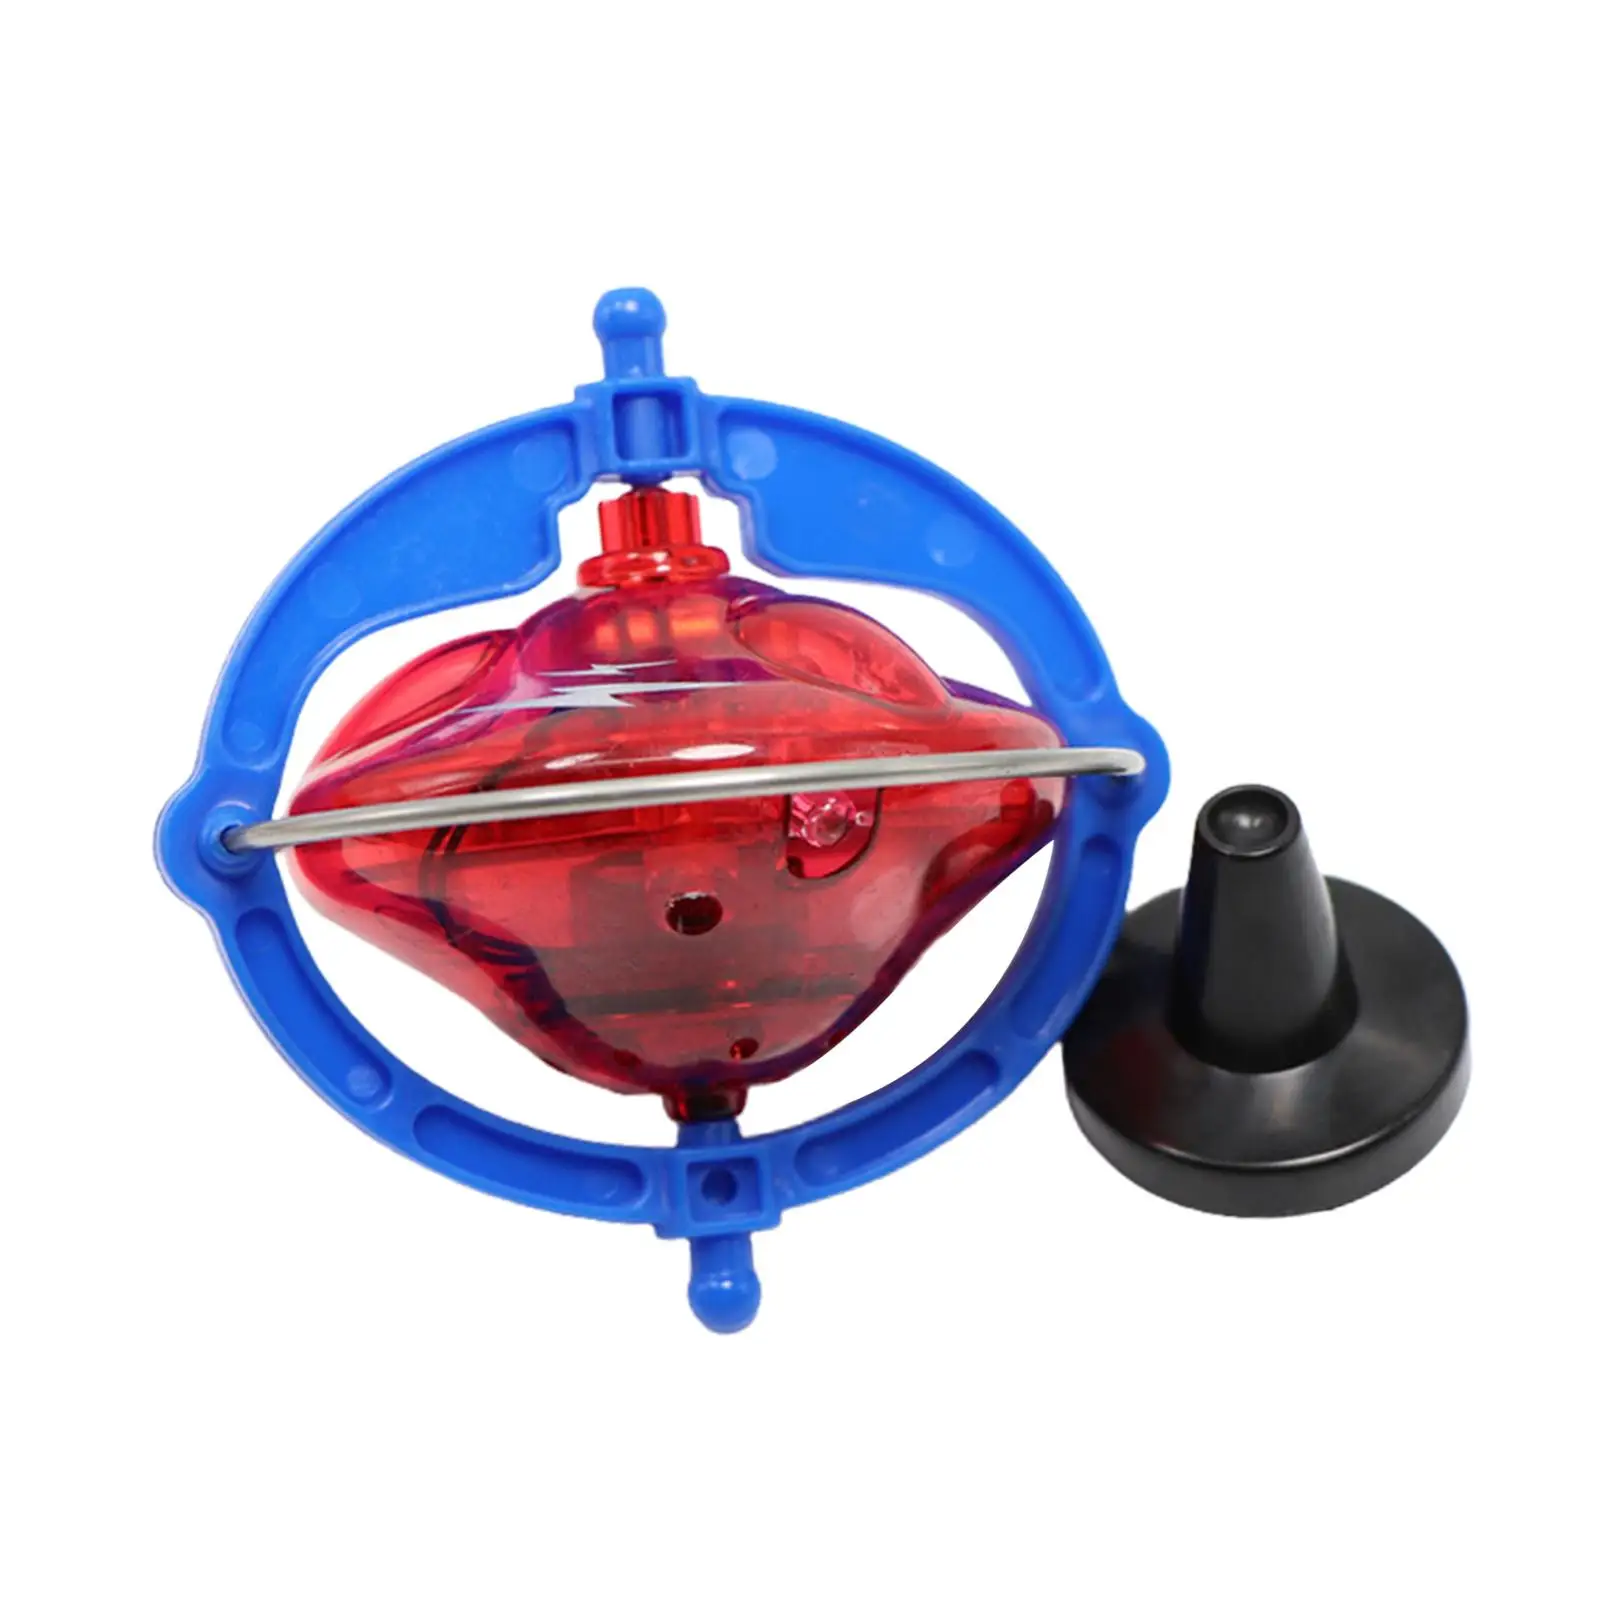 Rotating Tops Gyro Toy Children Toy Gyro Creative Rotating Toy for Living Room